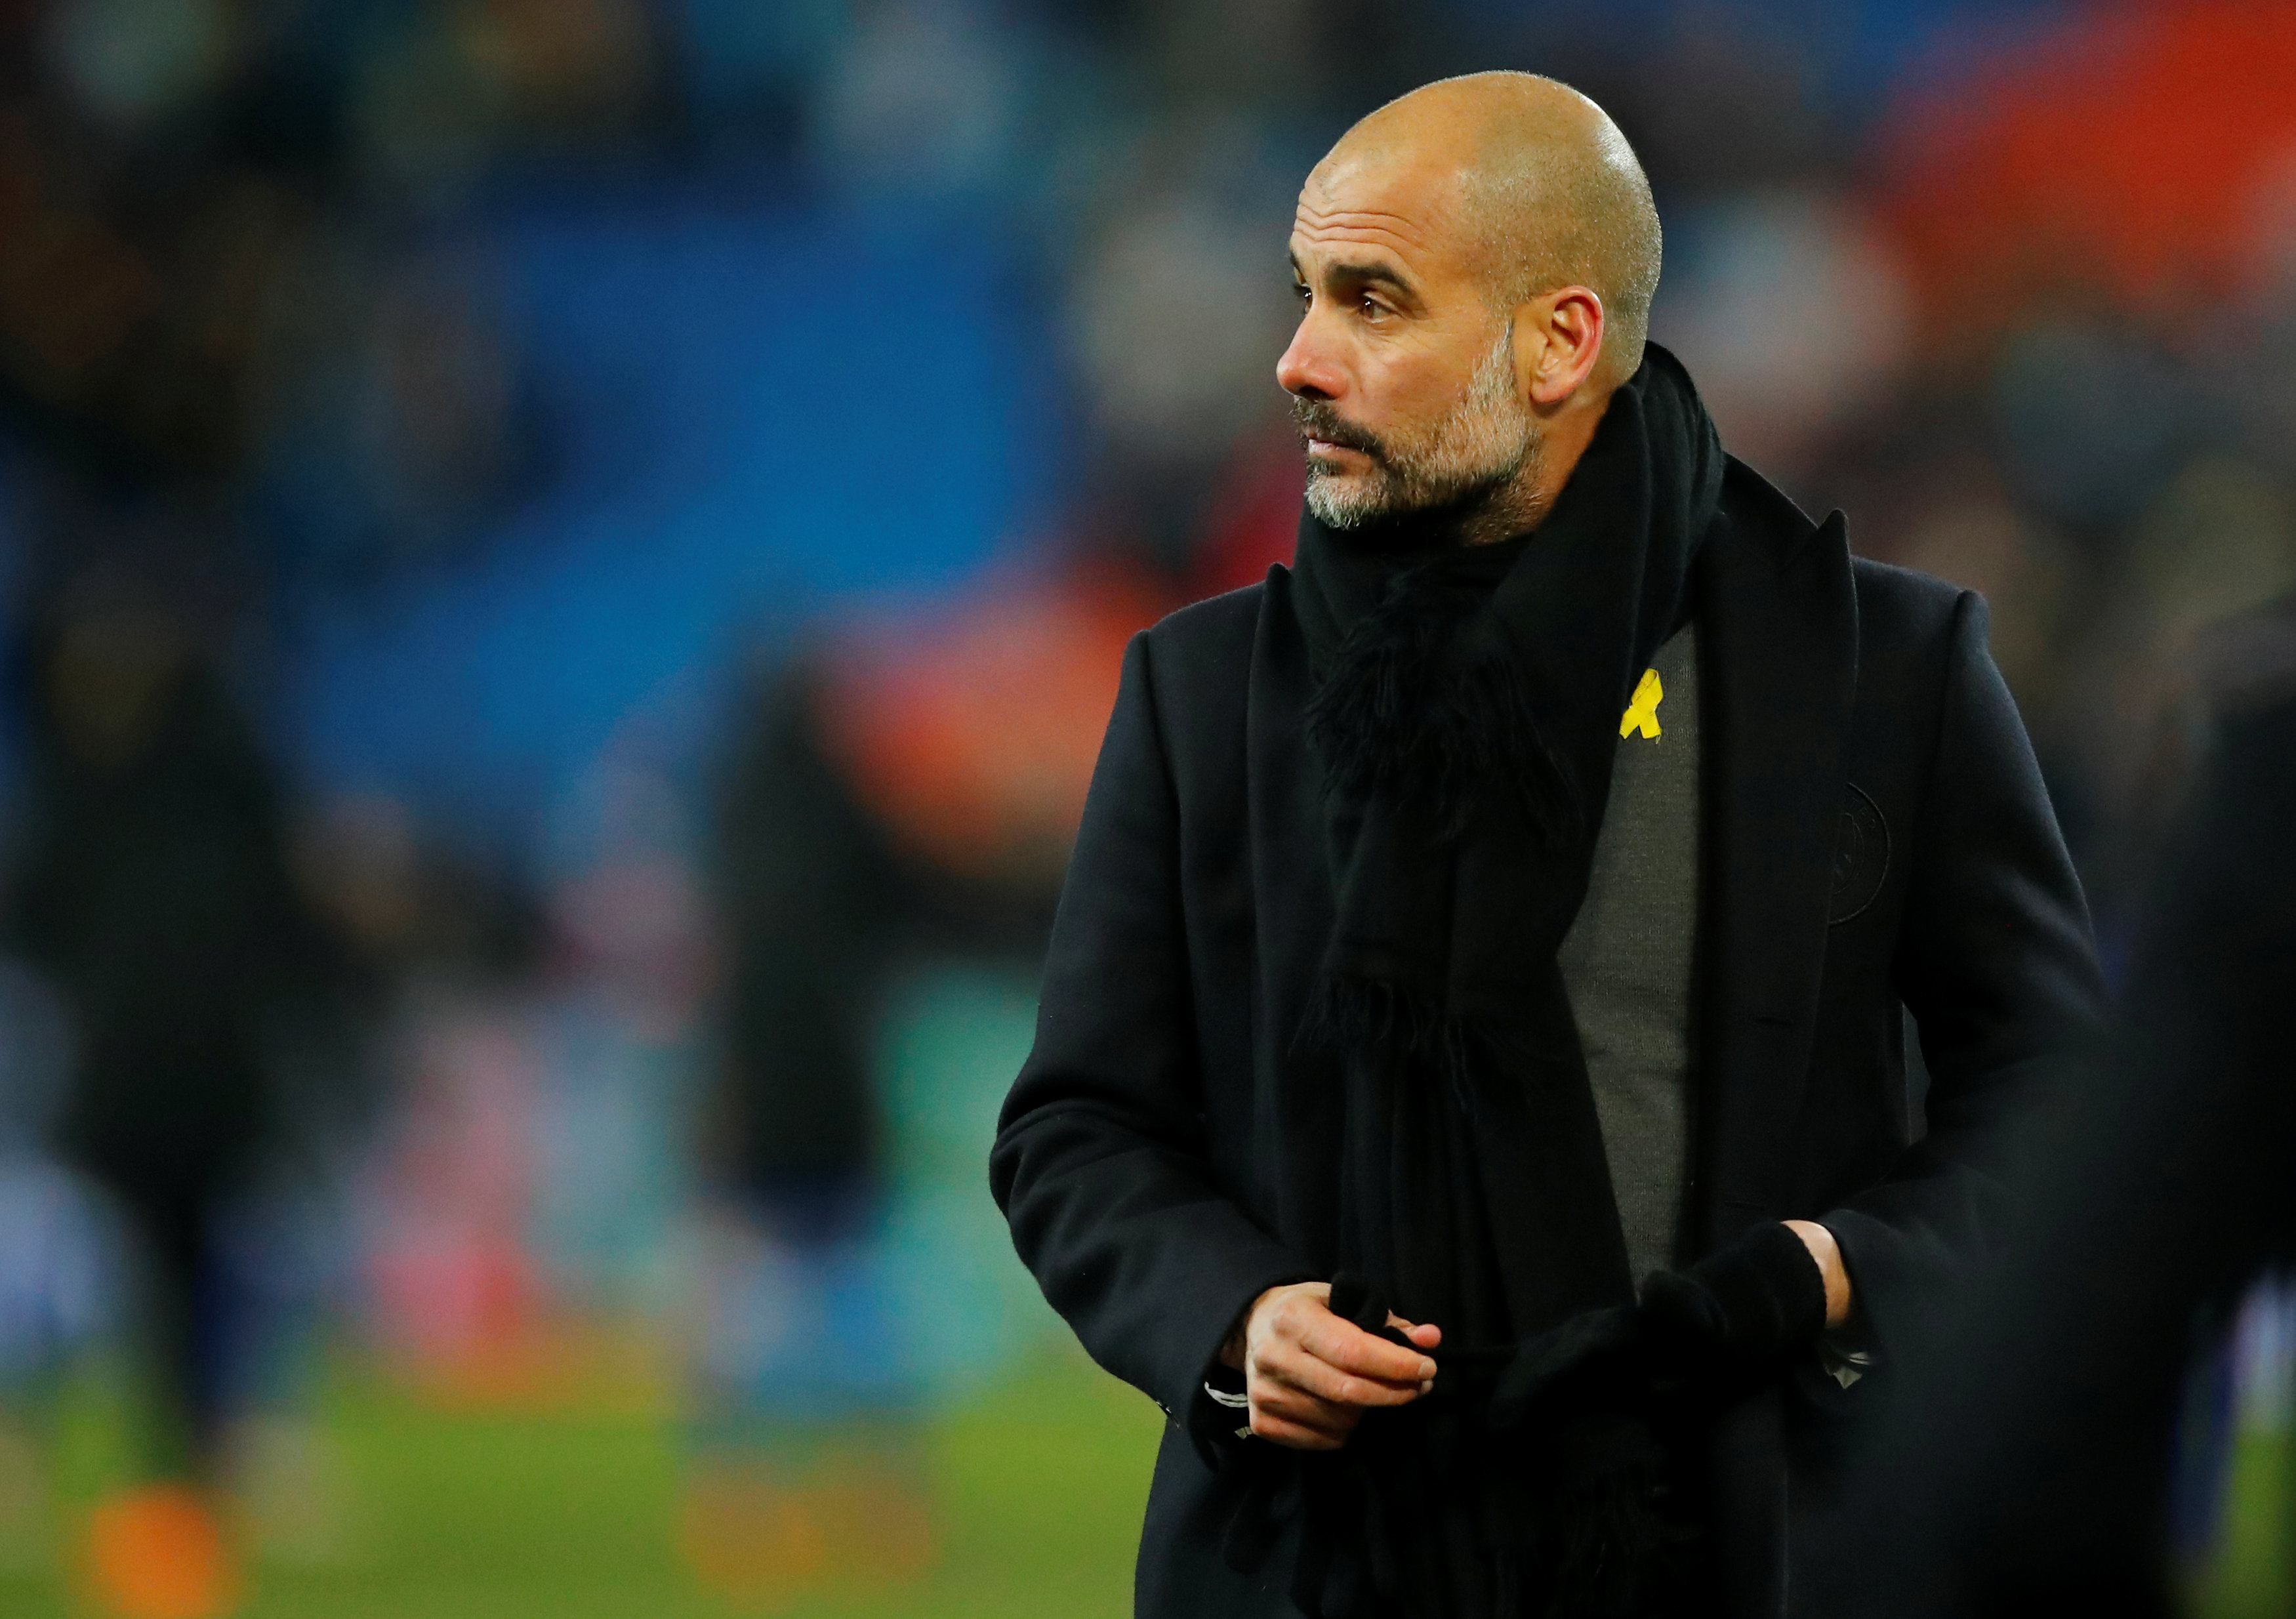 Pep Guardiola at Man City vs Basel in February (by Reuters)